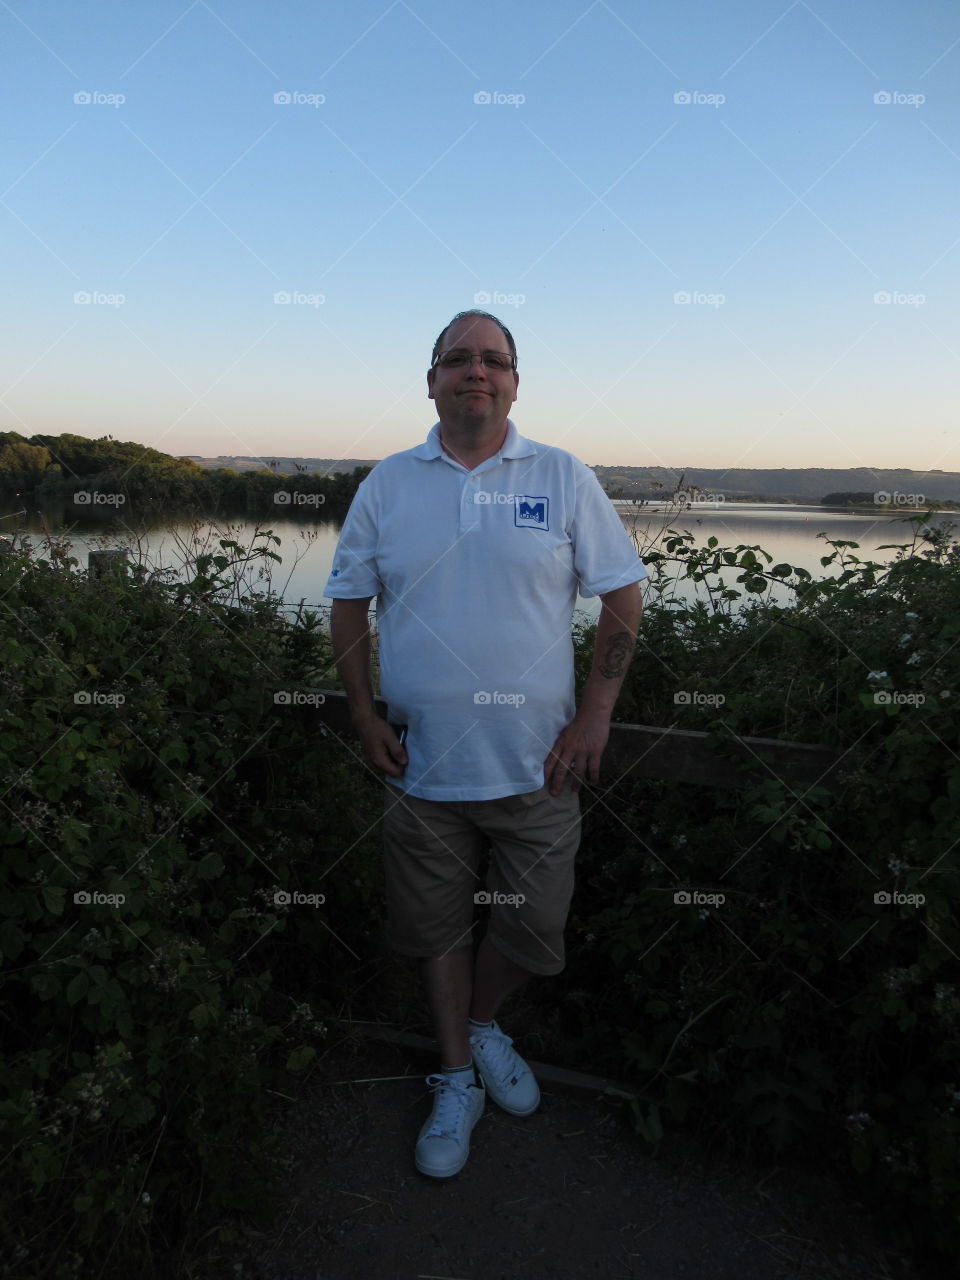 A evening out at chew valley lake